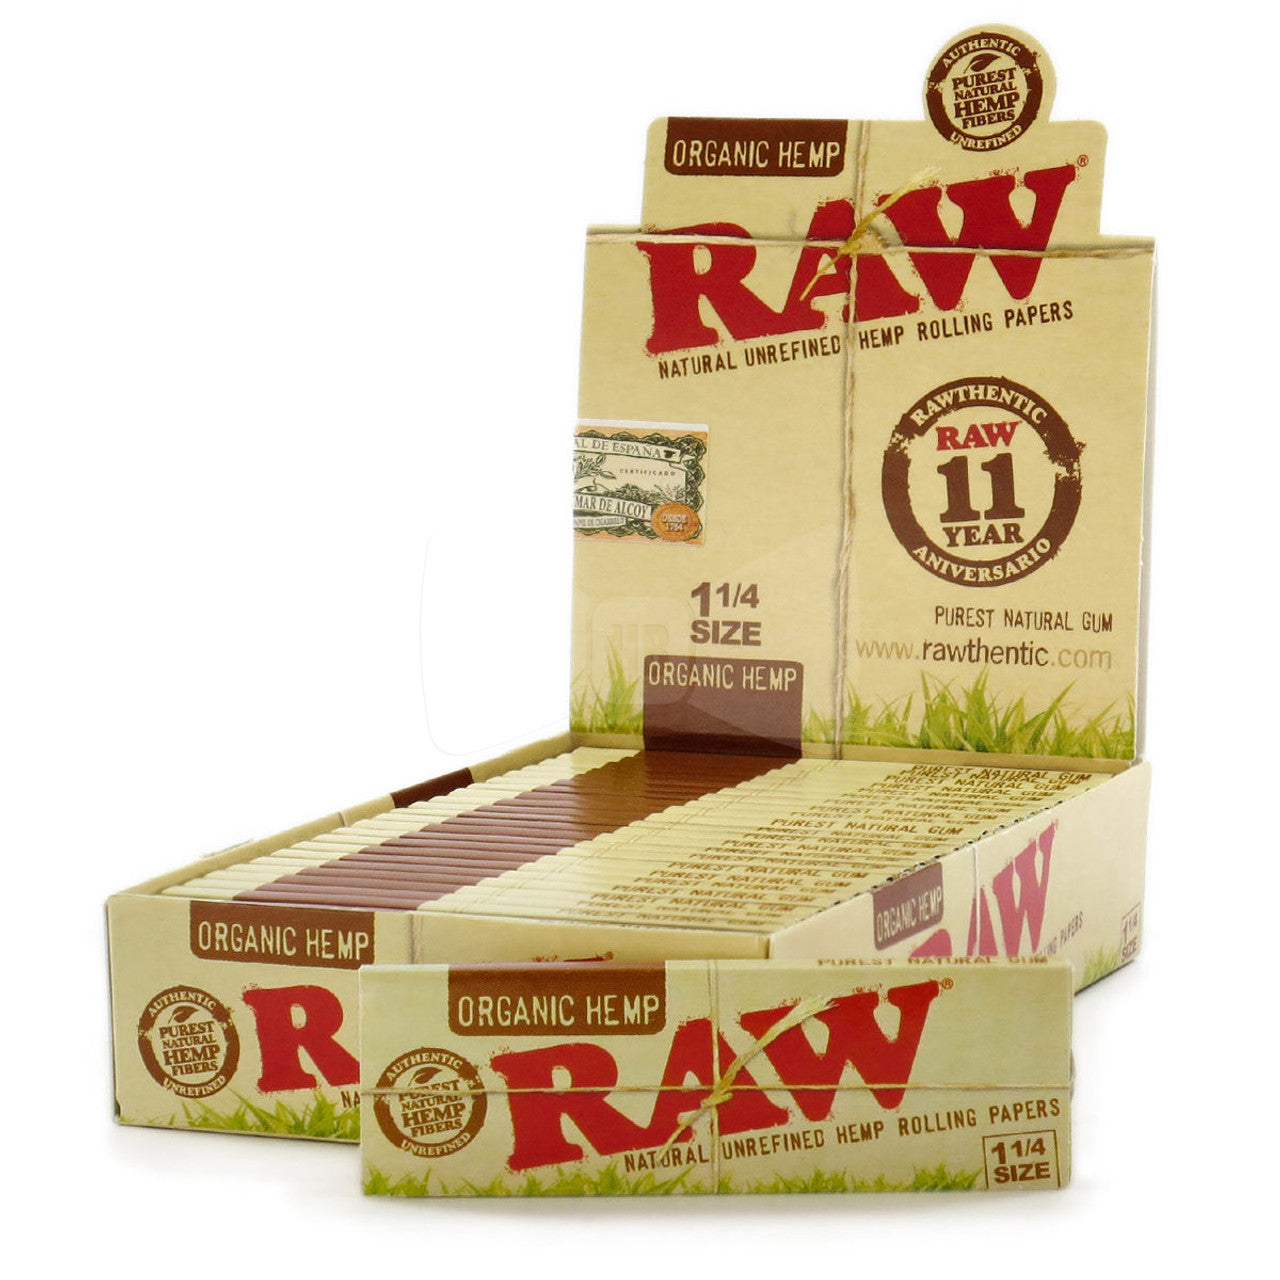 RAW - Organic Hemp 1 1/4 Size - Rolling Papers (24 x 50 papers) - MK Distro